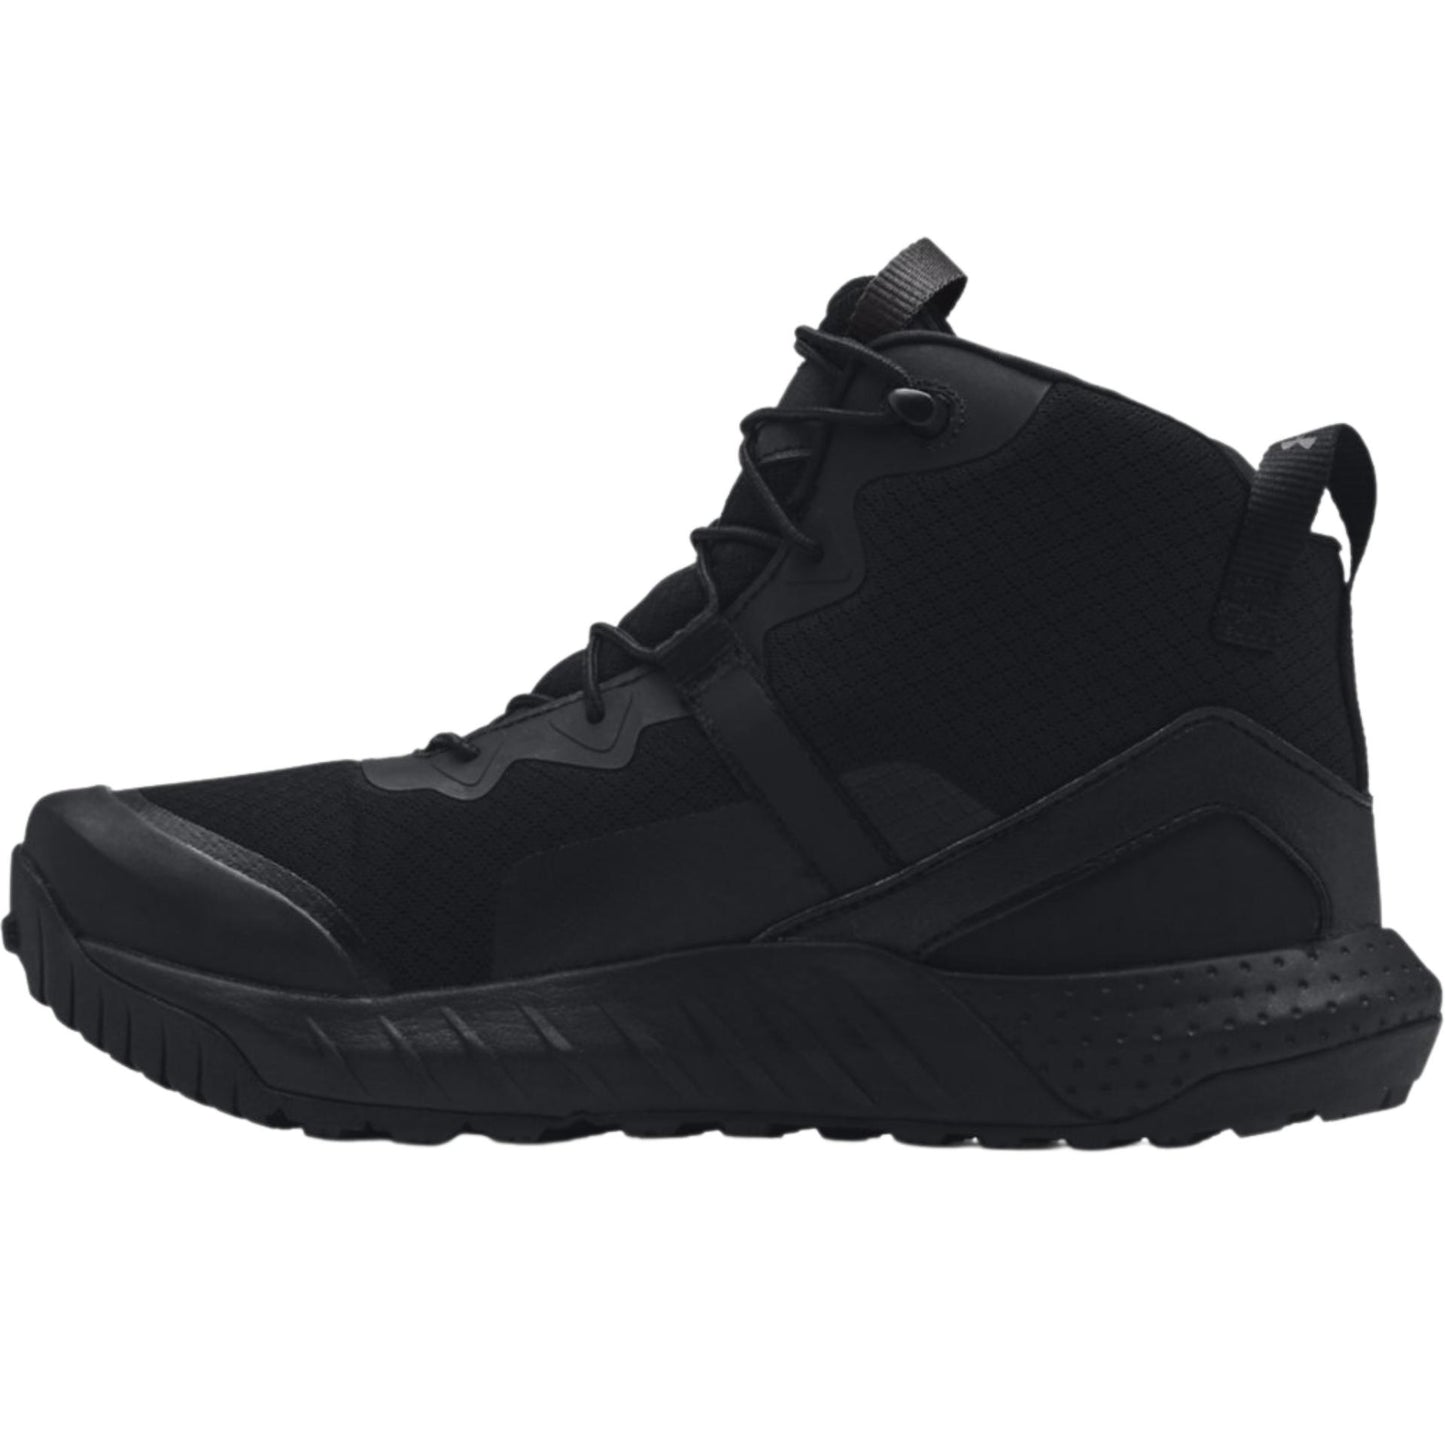 Under Armour Men's UA Micro G Valsetz Mid Leather Waterproof Tactical Boots